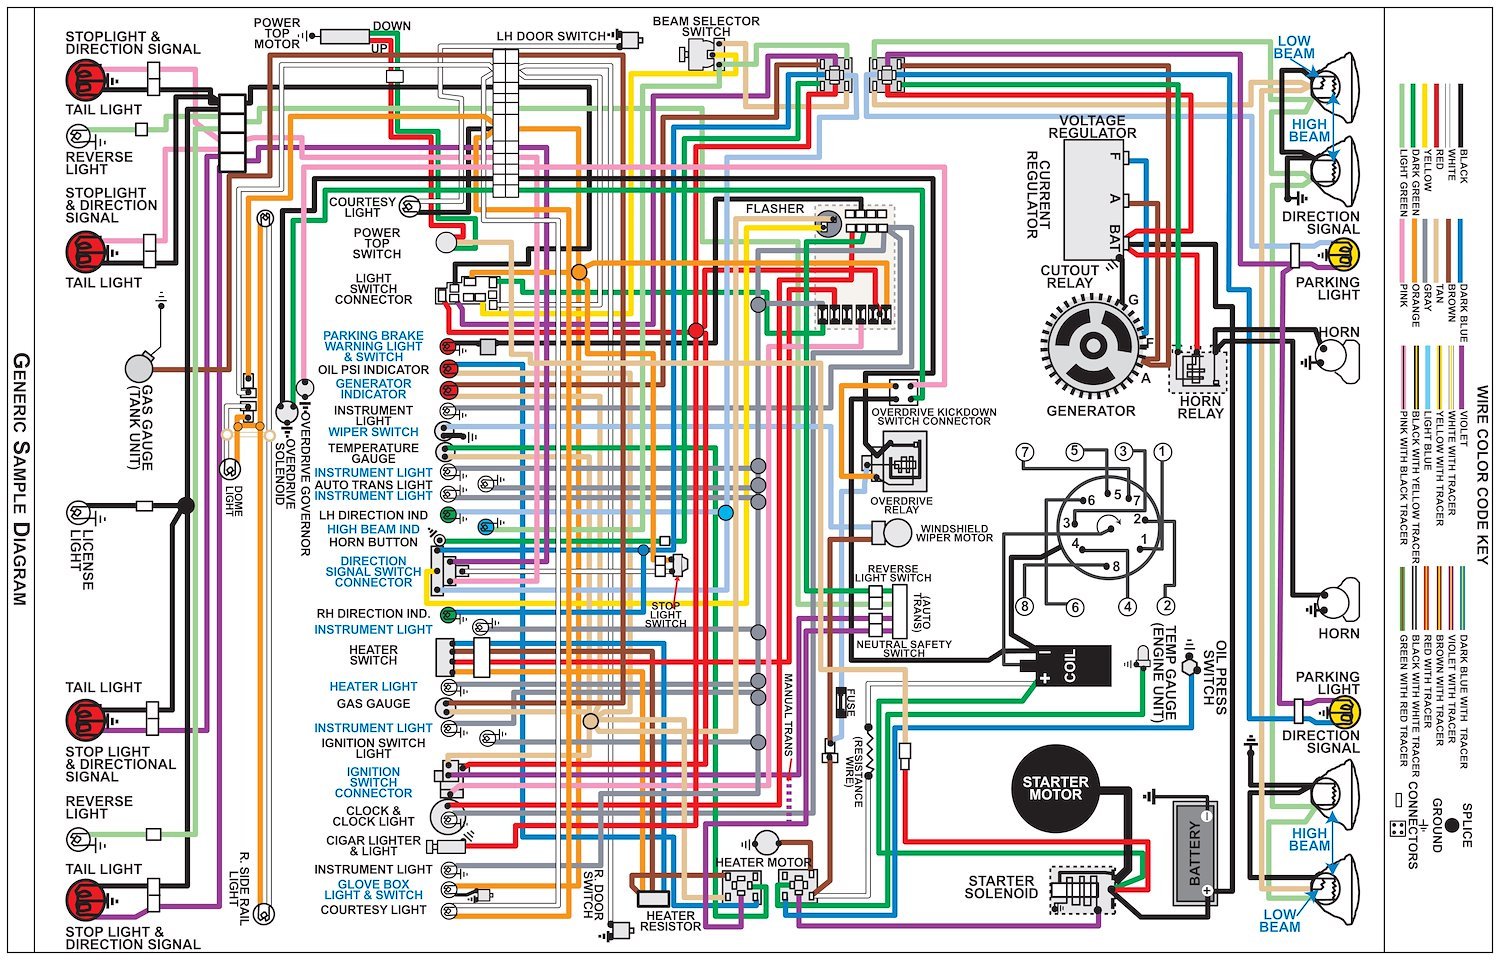 Wiring Diagram for 1964 Ford Falcon, 11 in x 17 in., Laminated